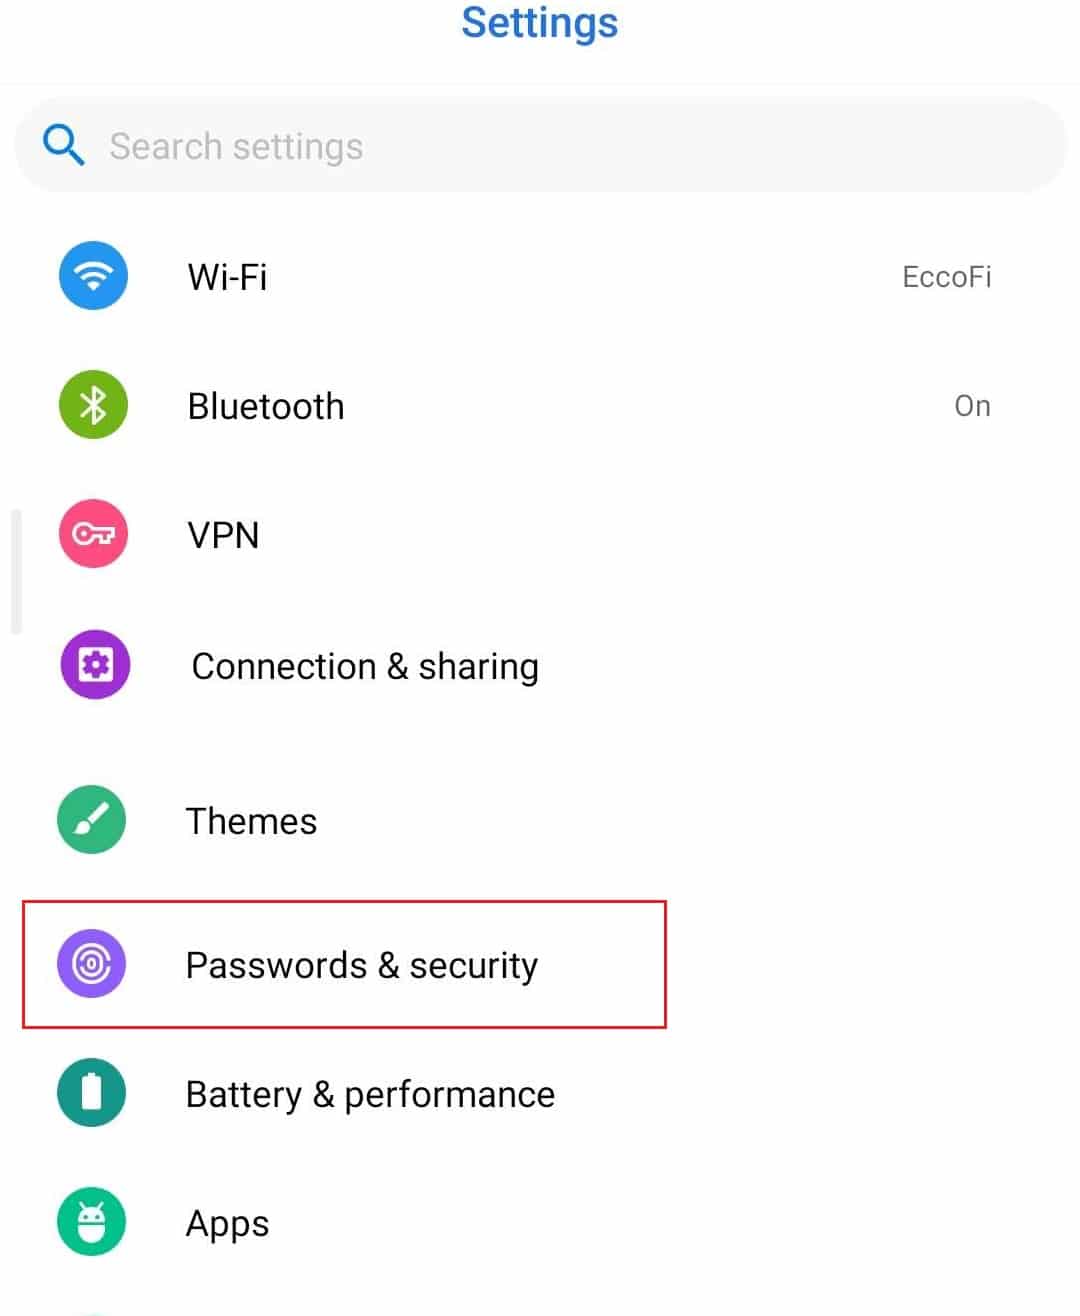 Open Settings on your device and then tap on the password and security option.